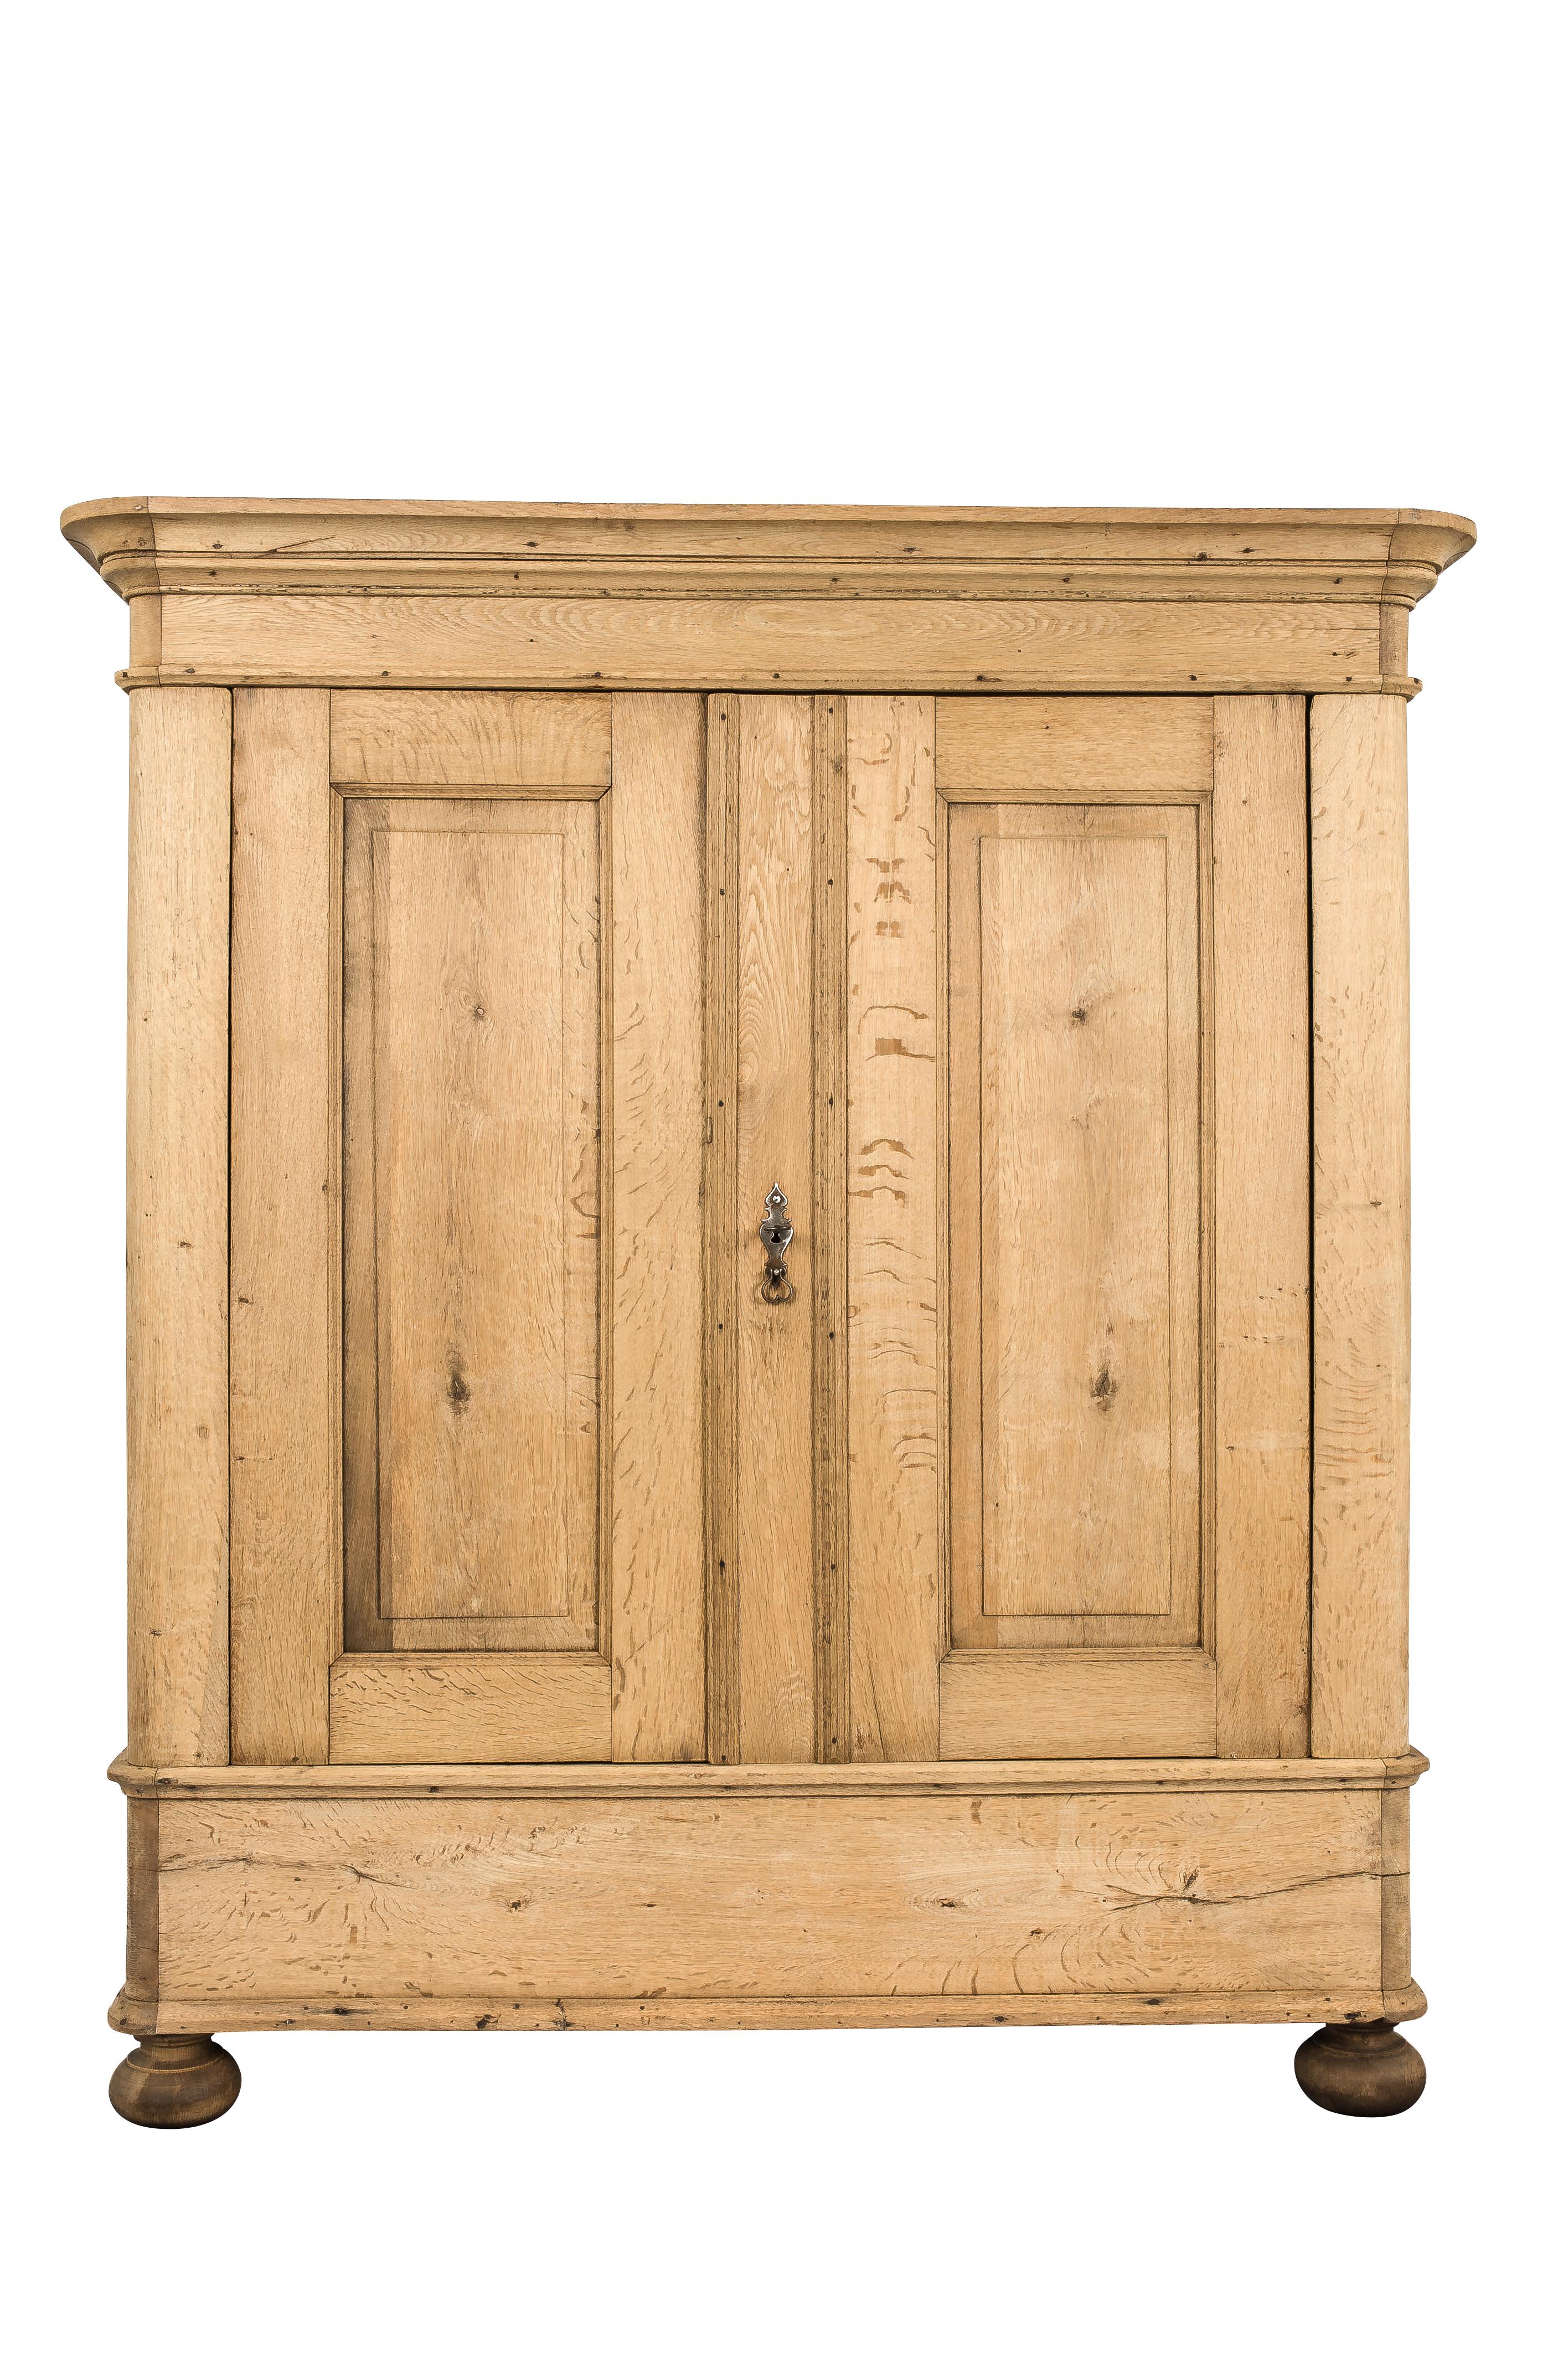 A rustic two-door cabinet that was made in Germany in the mid-19th century. It has beautifully rounded corners that give a natural touch to the piece. Both doors and sides are fitted with elevated panels surrounded by an elegant mold. It was